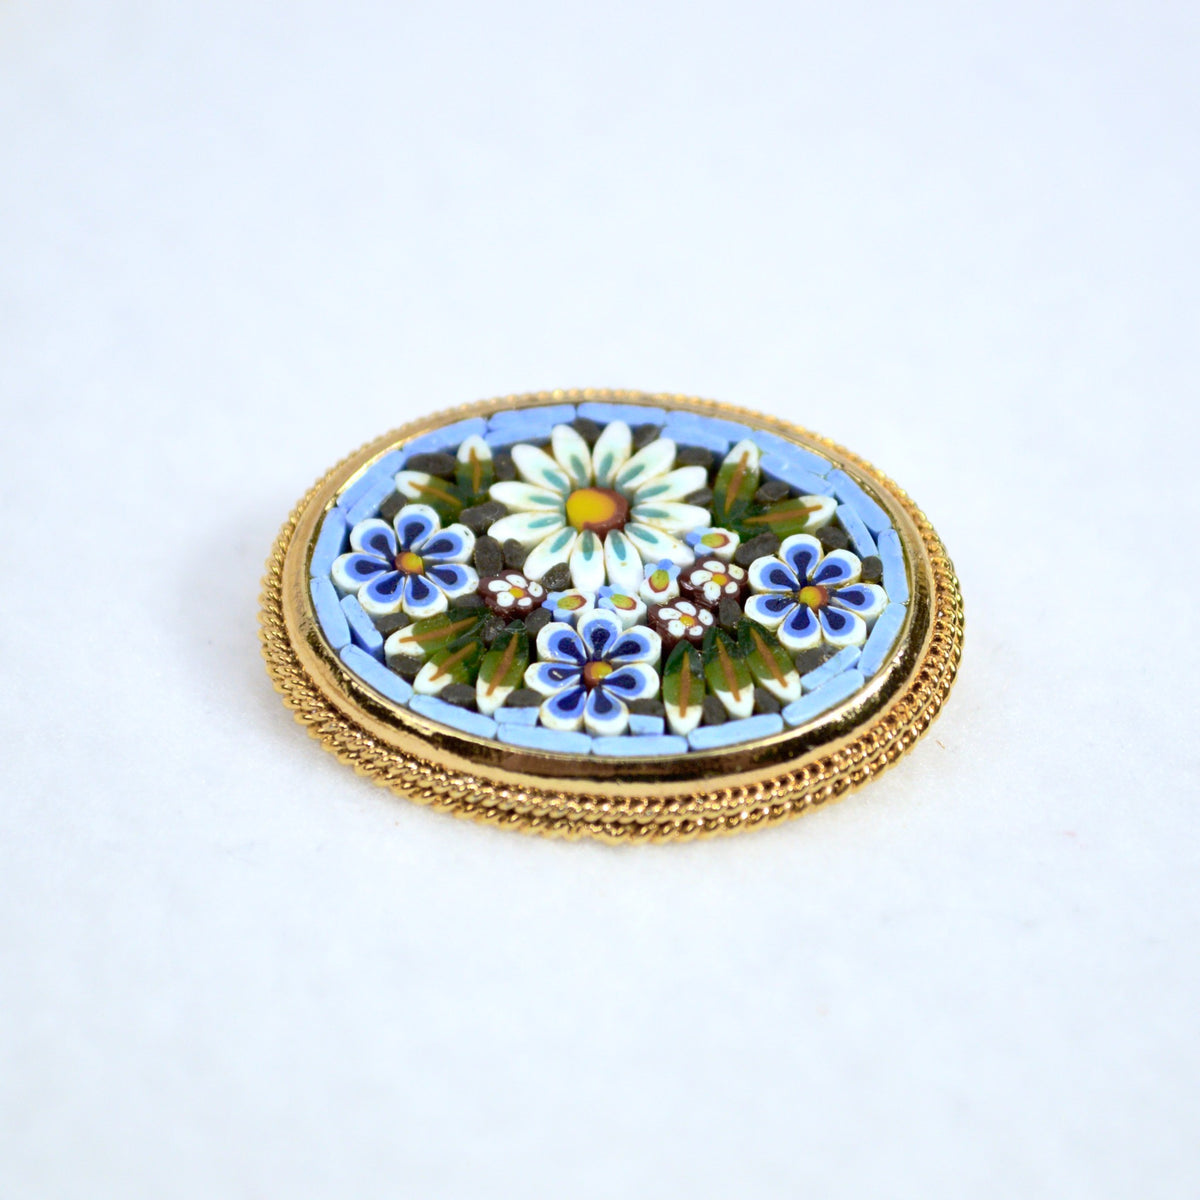 Florentine Mosaic Oval Brooch, Lapel Pin, Made in Italy - My Italian Decor